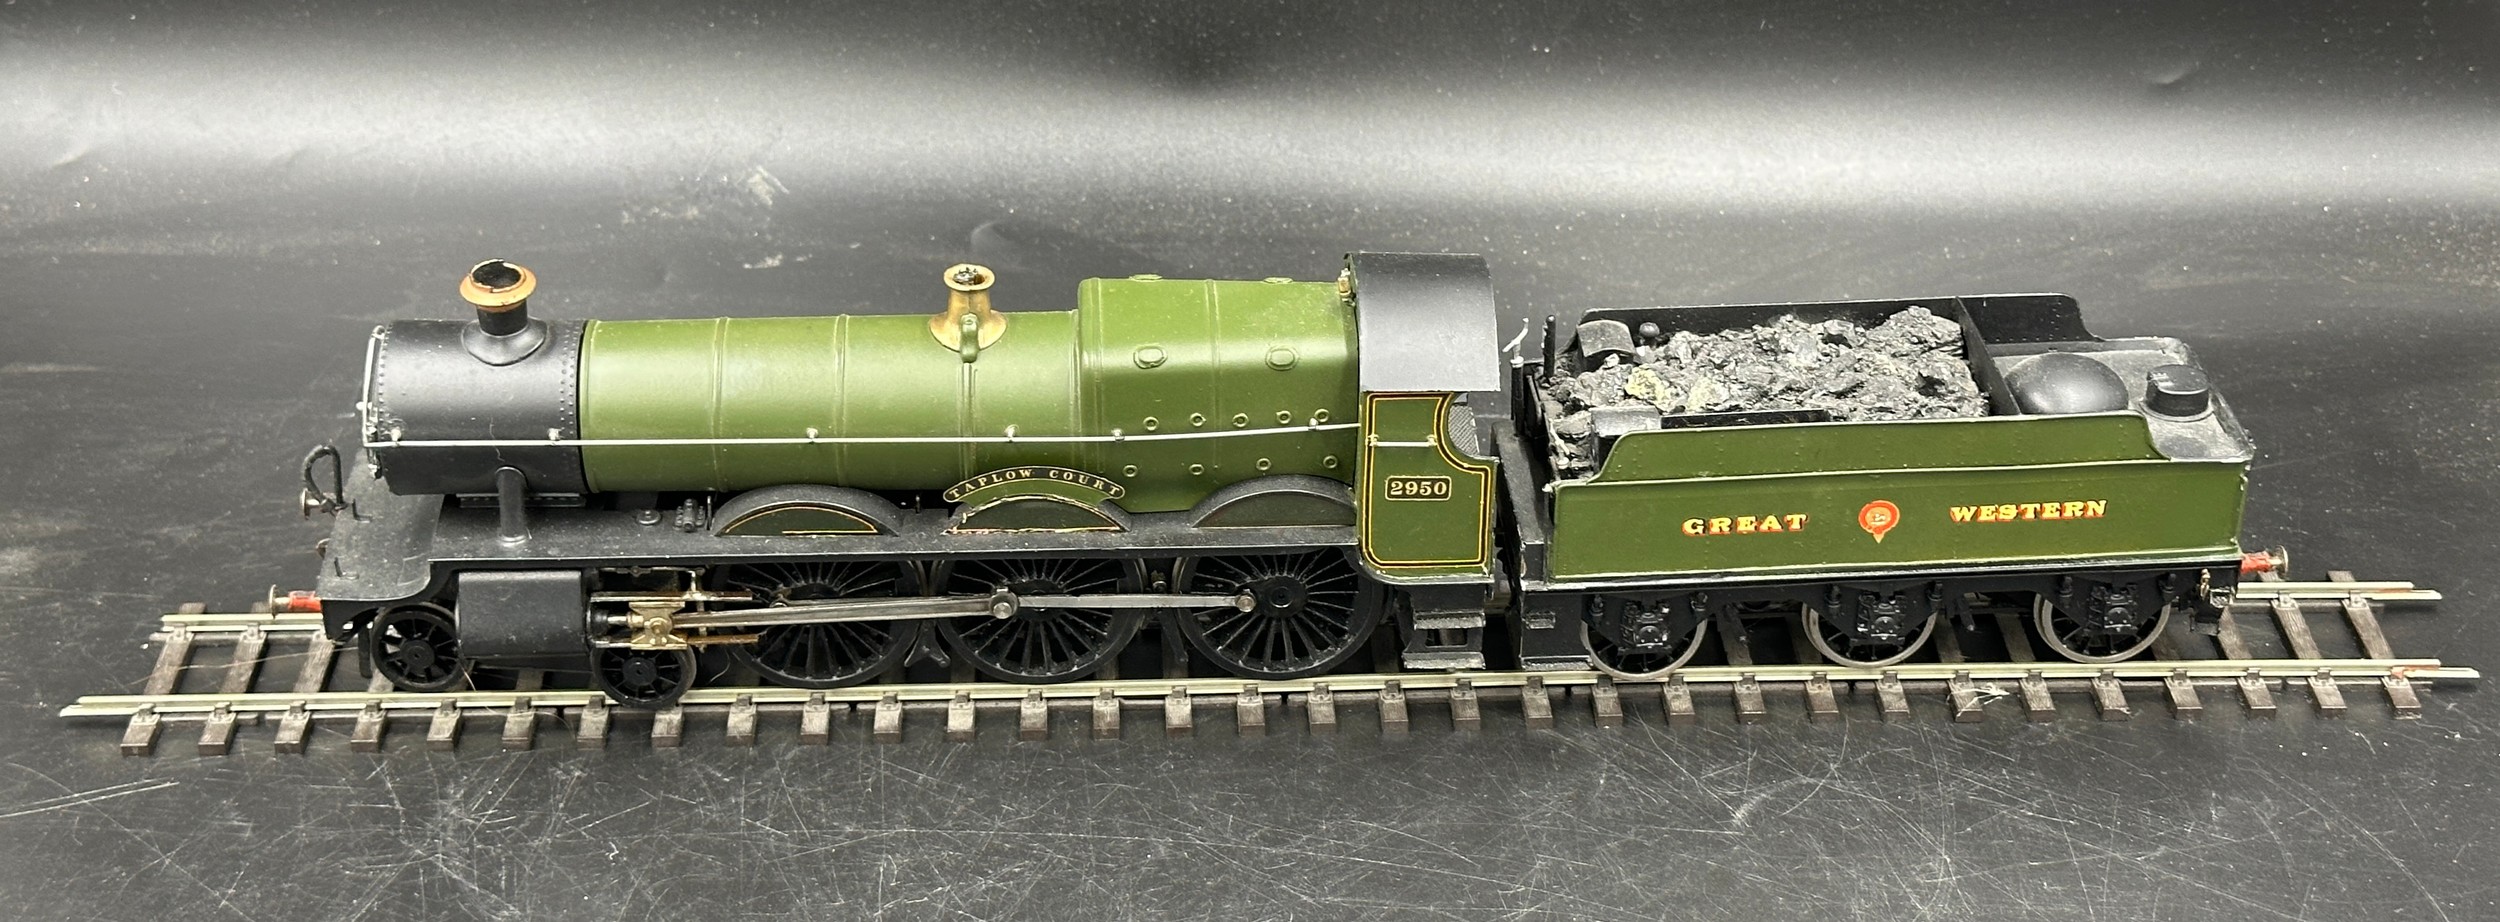 Taplow Court 2950 Great Western 0 gauge in 'Great Western' green with brass name and number plates - Image 2 of 16